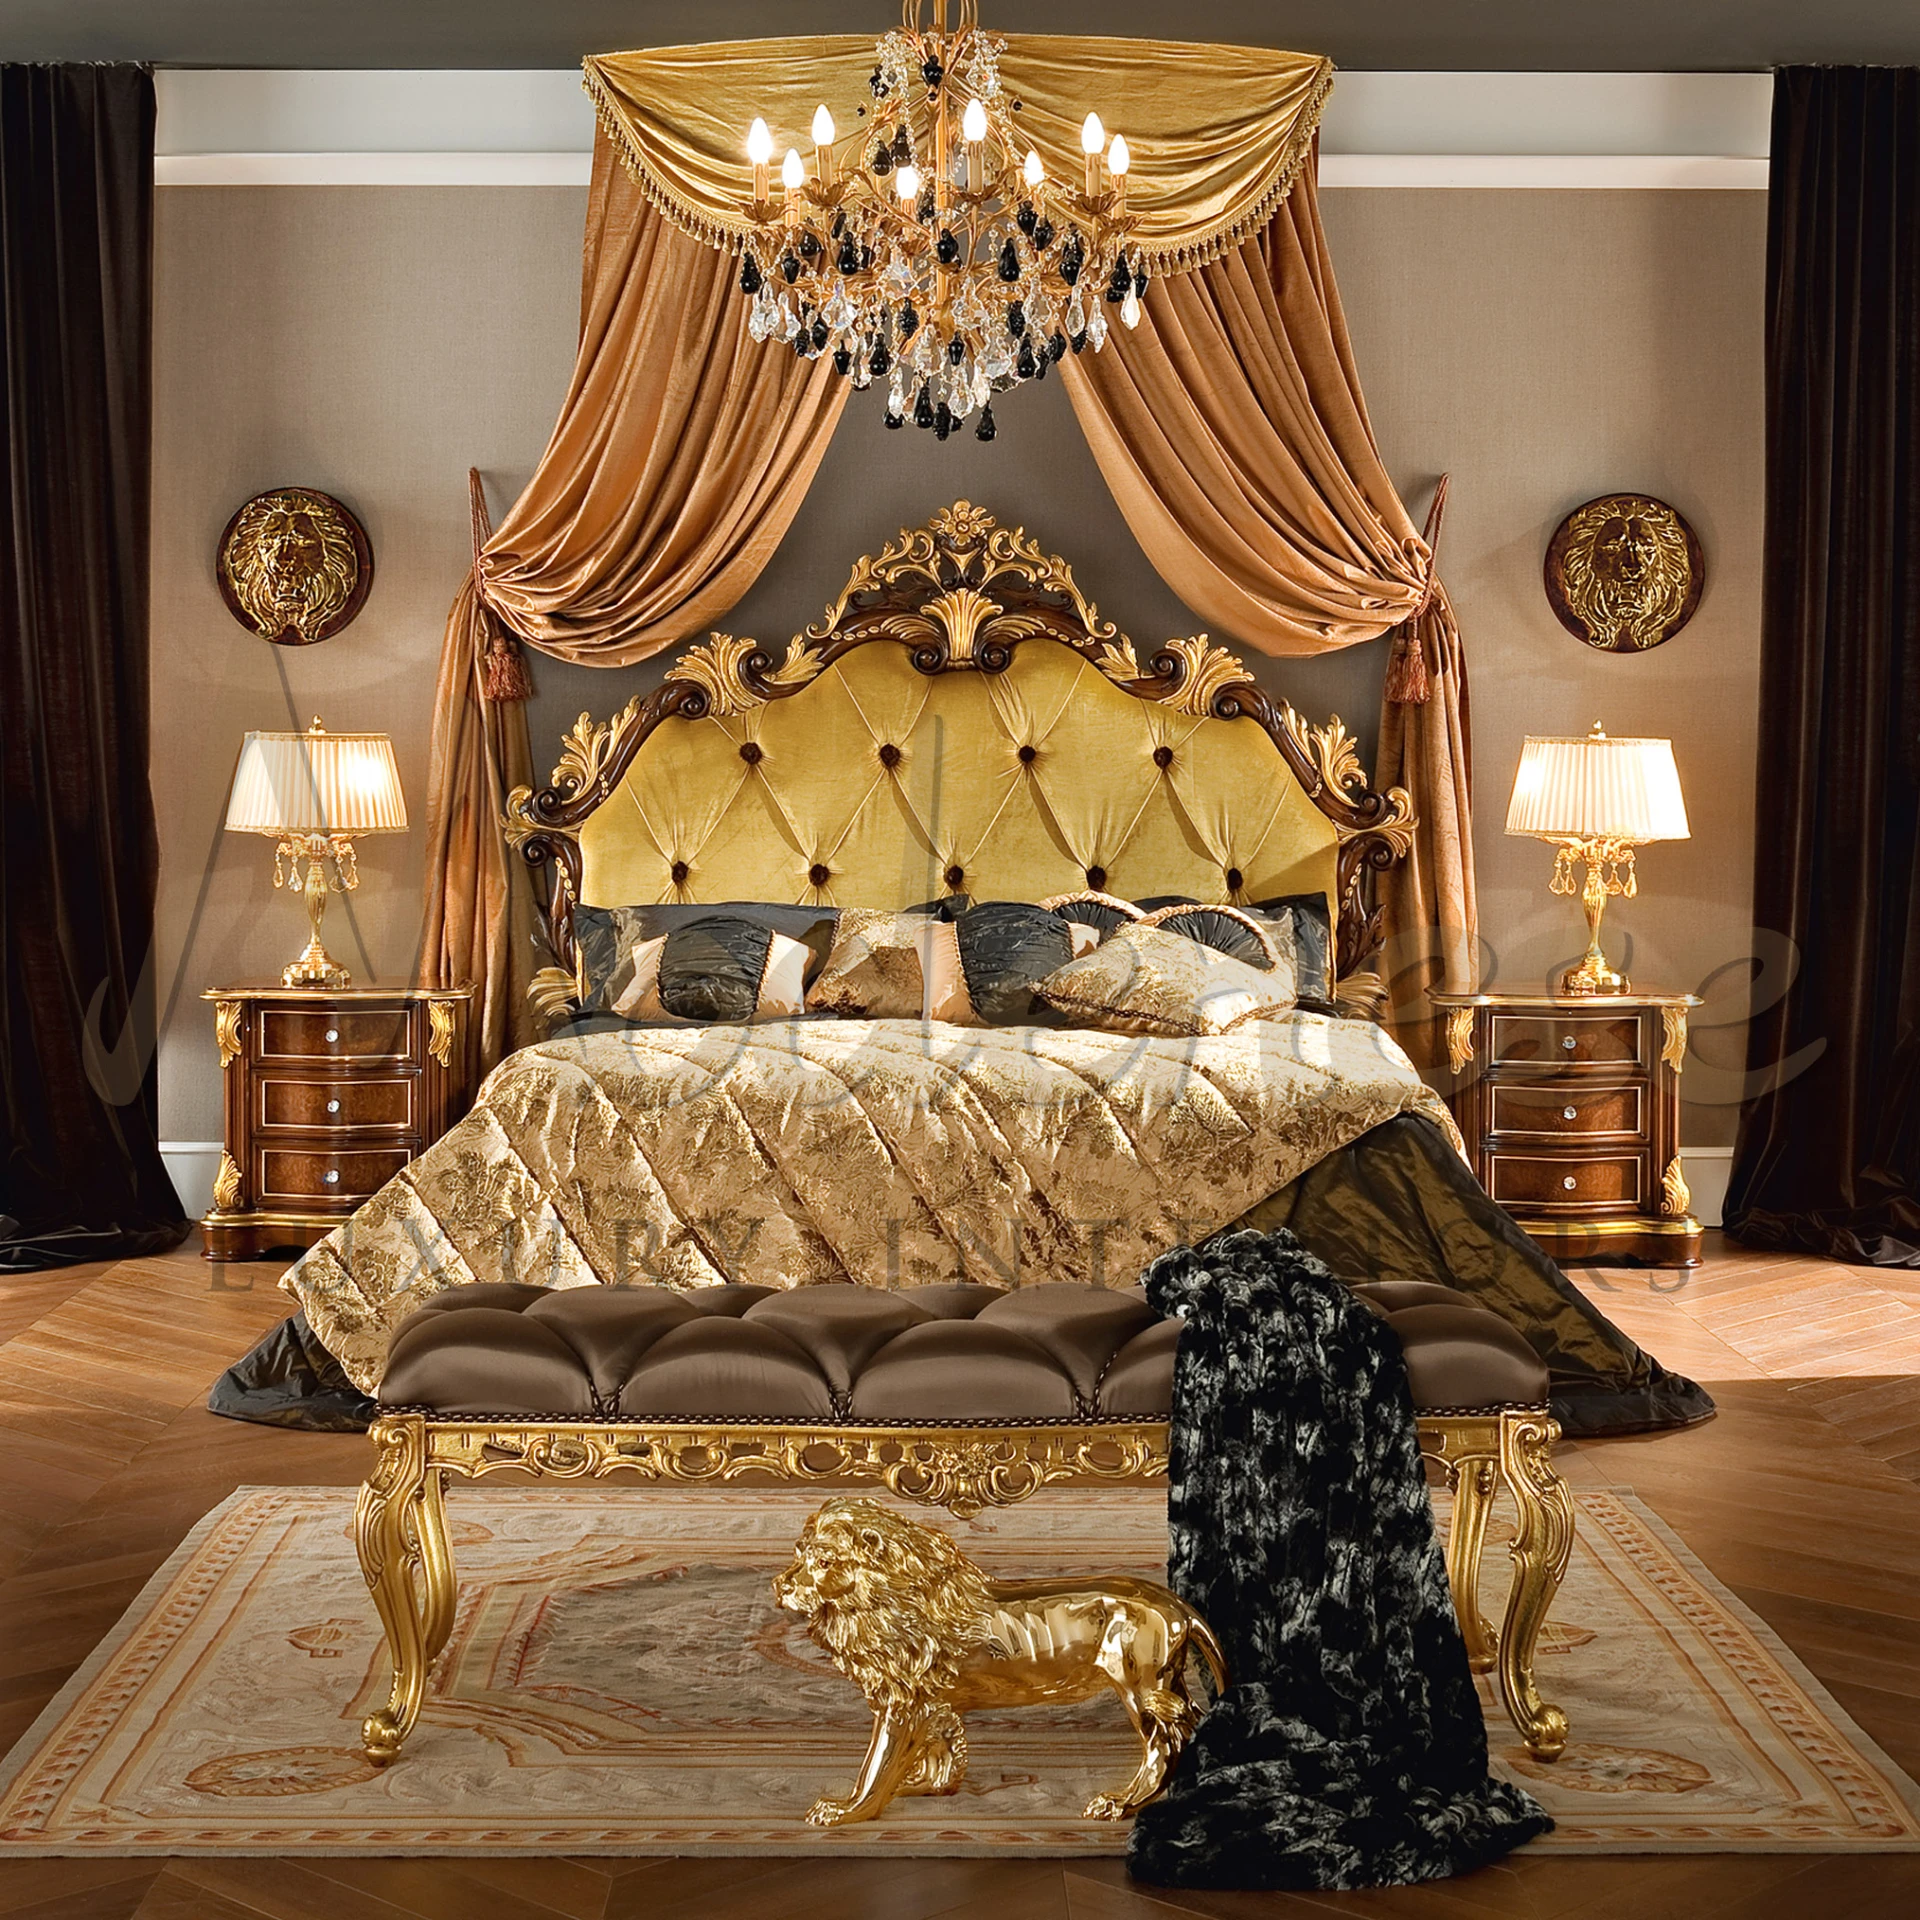 An opulent bedroom featuring a bed with a golden tufted headboard and ornate wood details, luxurious bedding, matching bedside tables with lamps, a grand chandelier, and a bench with golden lion.